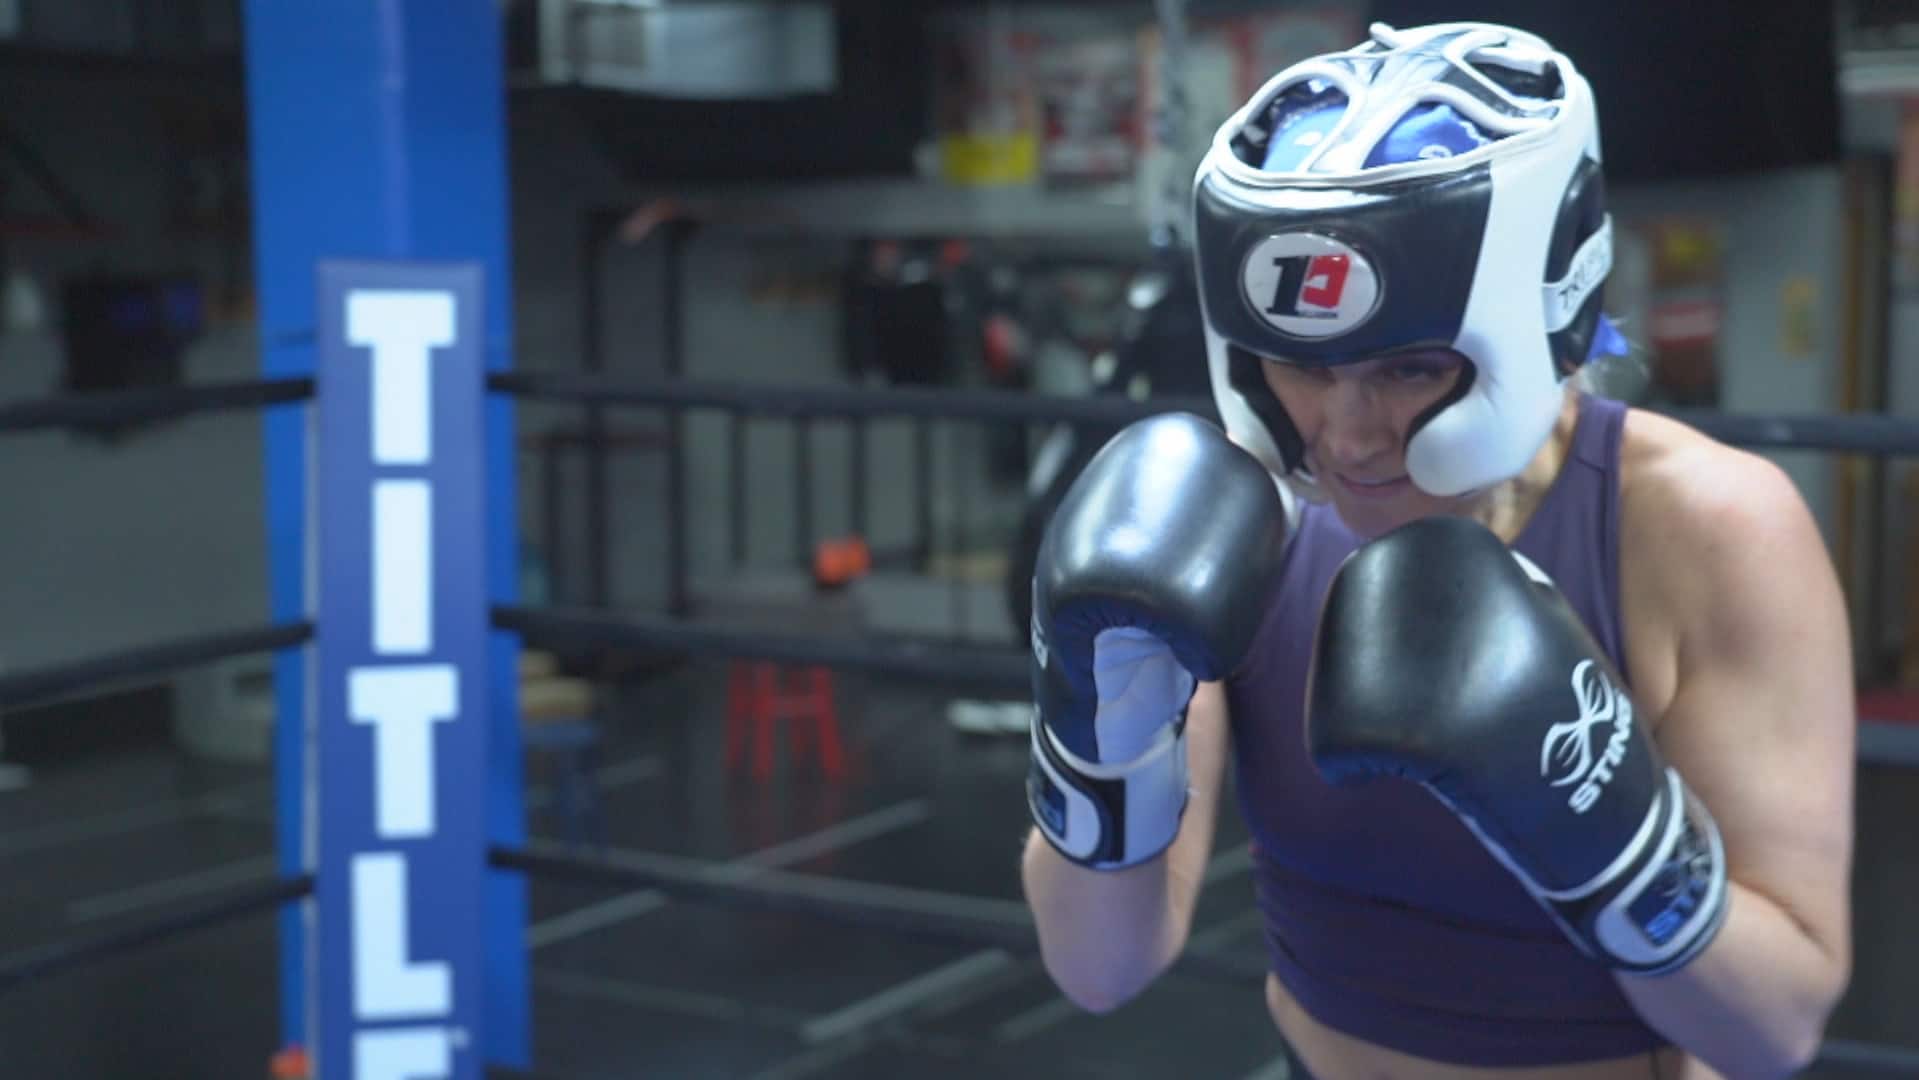 this boxer is using science to track her brain health and helping researchers better understand head impacts